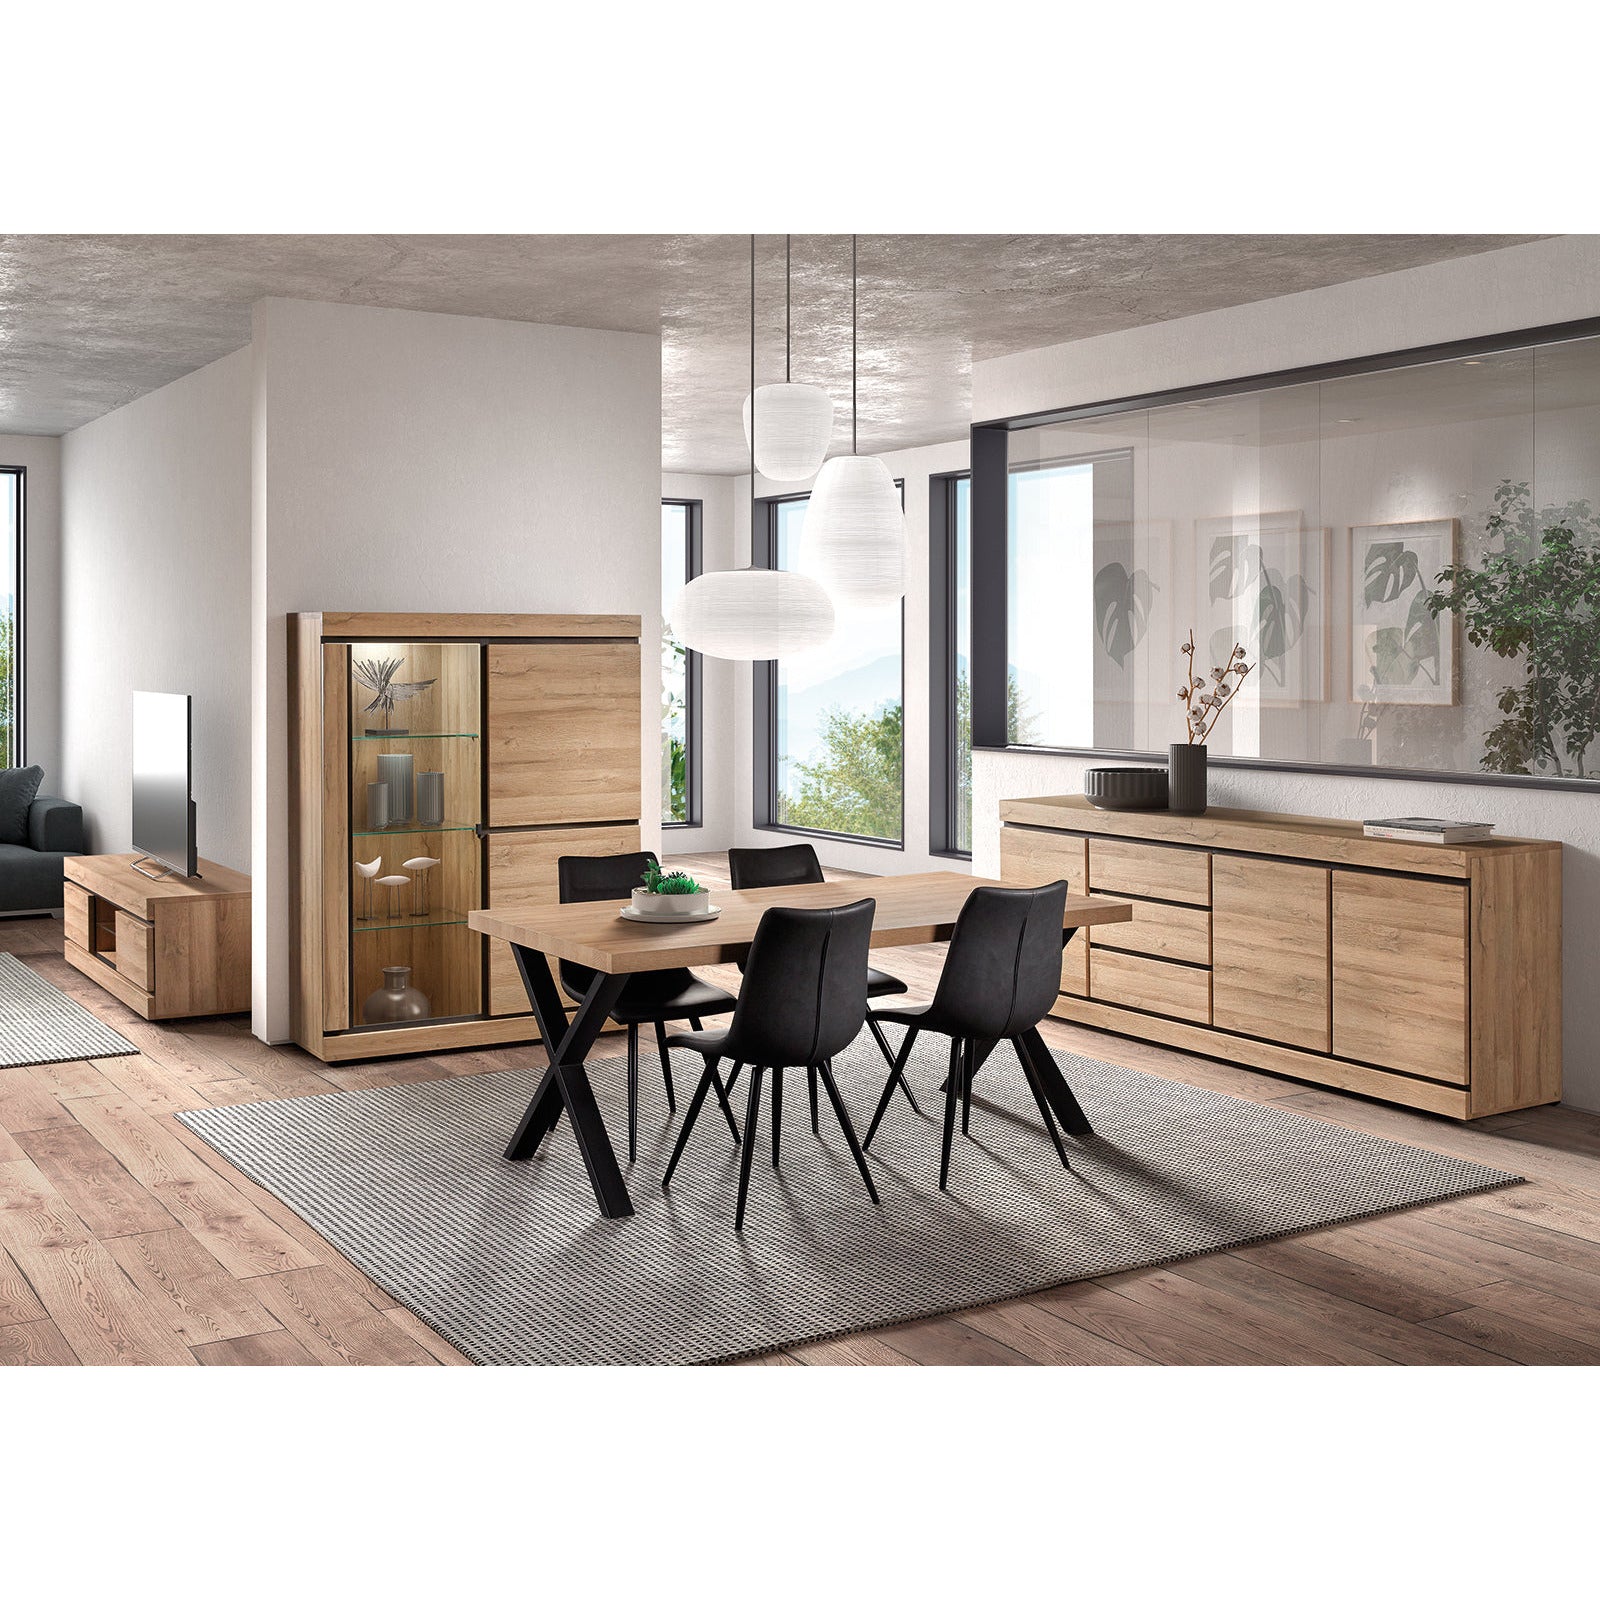 TV cabinet | Furniture series Talenso | natural, gray, brown